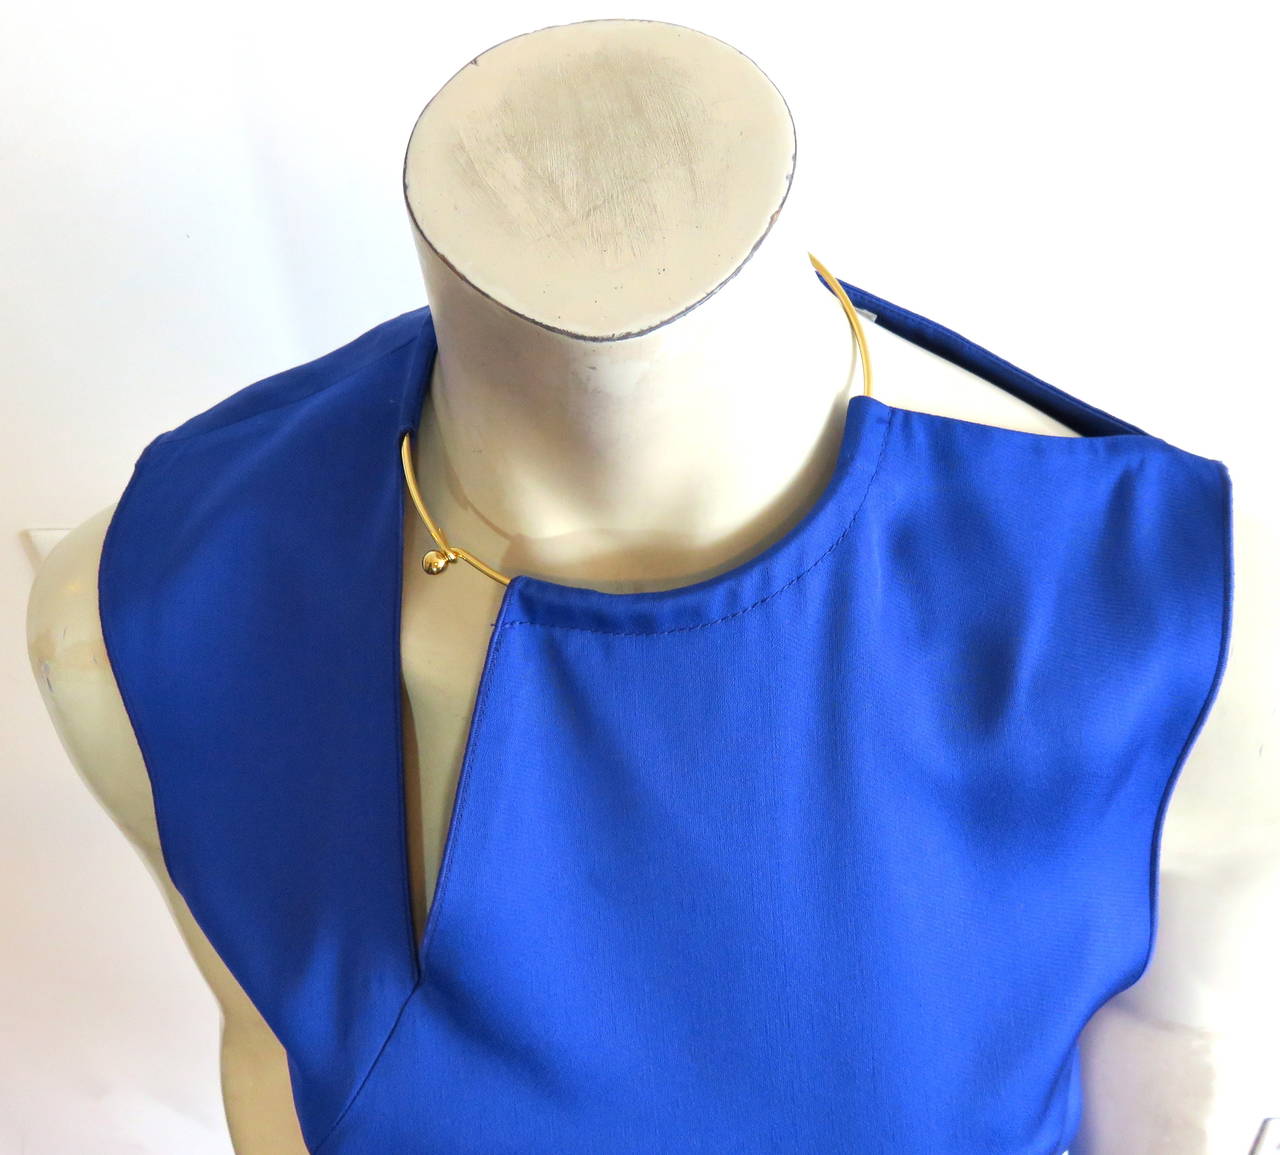 CELINE by Phoebe Philo Metal wire-necklace shift dress In Excellent Condition For Sale In Newport Beach, CA